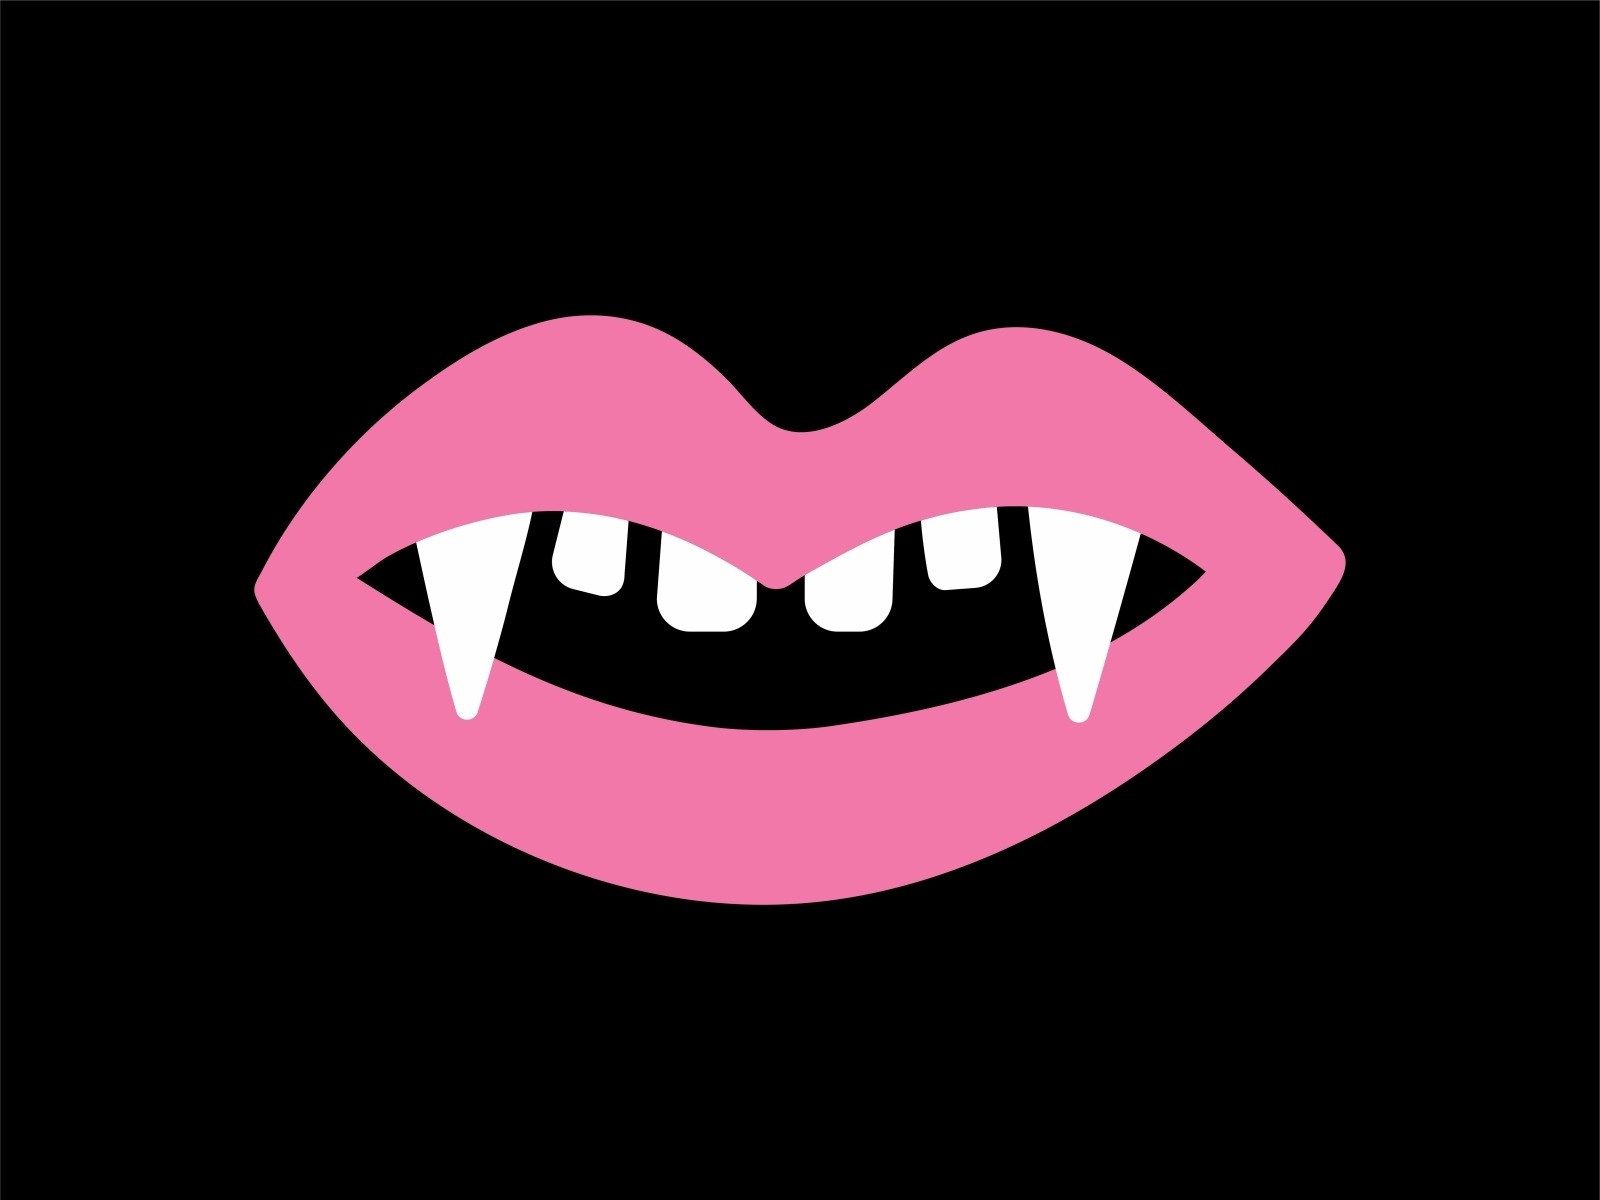 Vampire Fang Lips by Y2K SVG on Dribbble